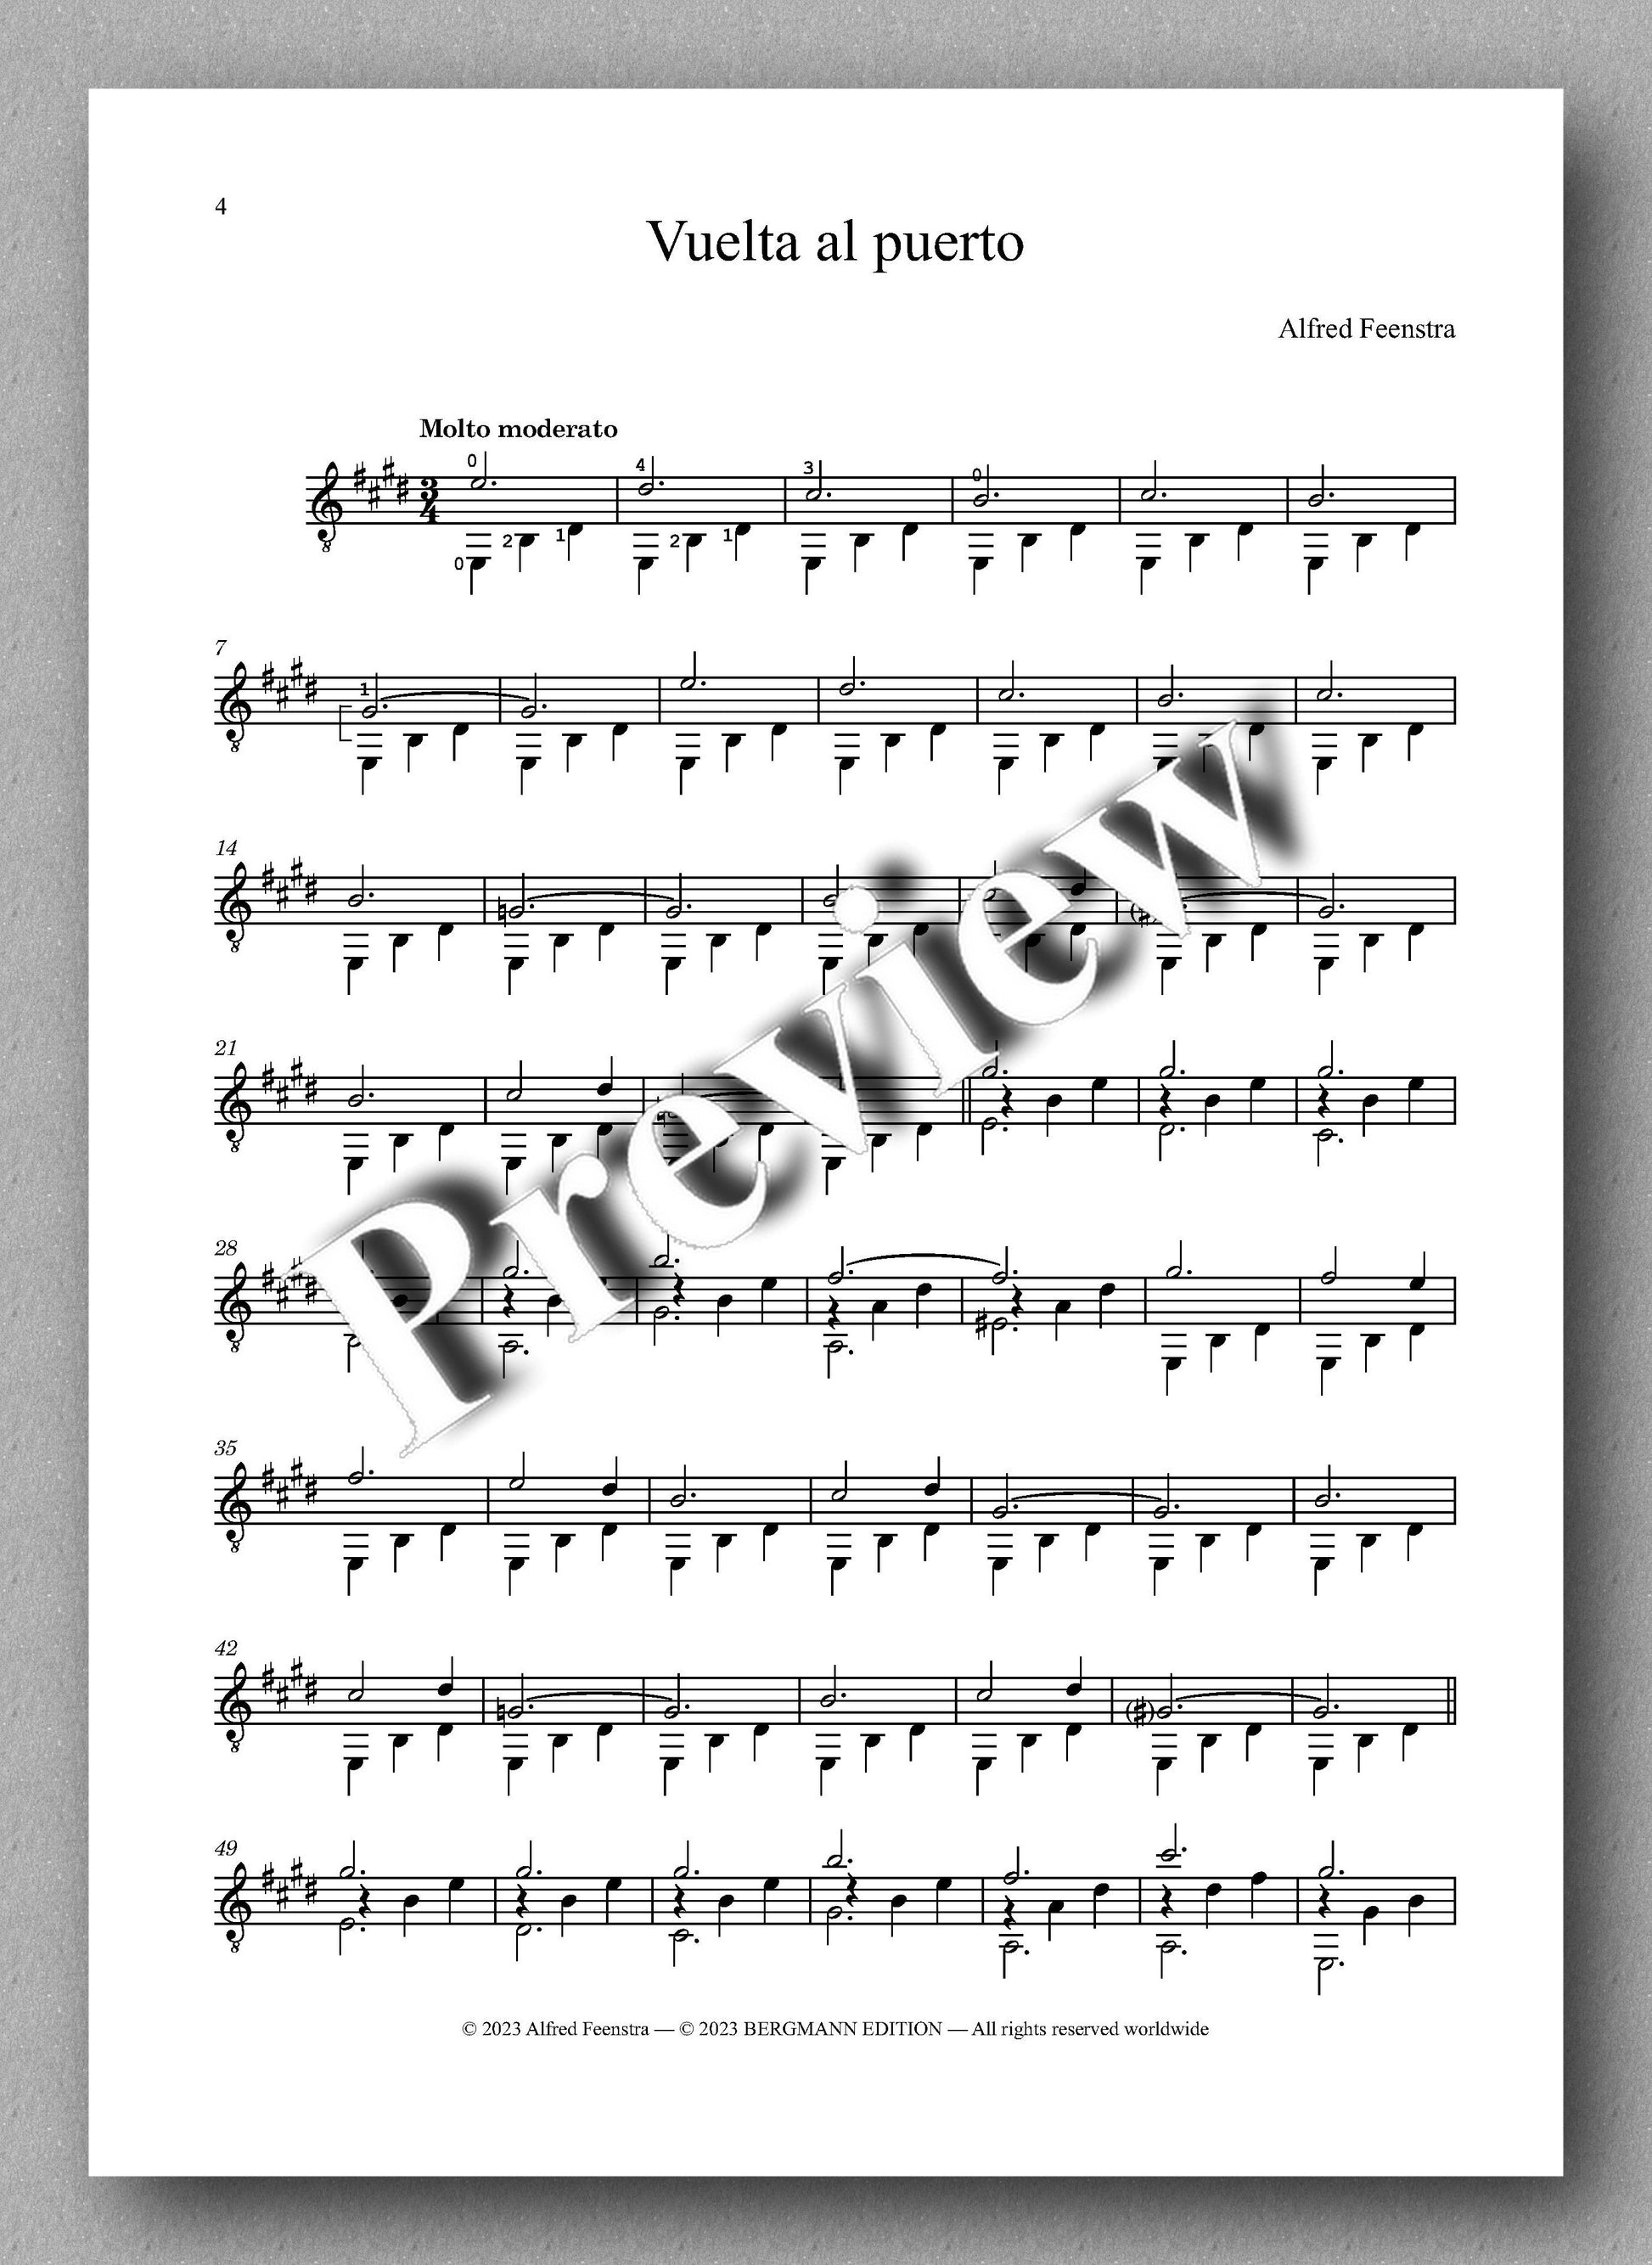 Feenstra, Vuelta al puerto - preview of the music score 1